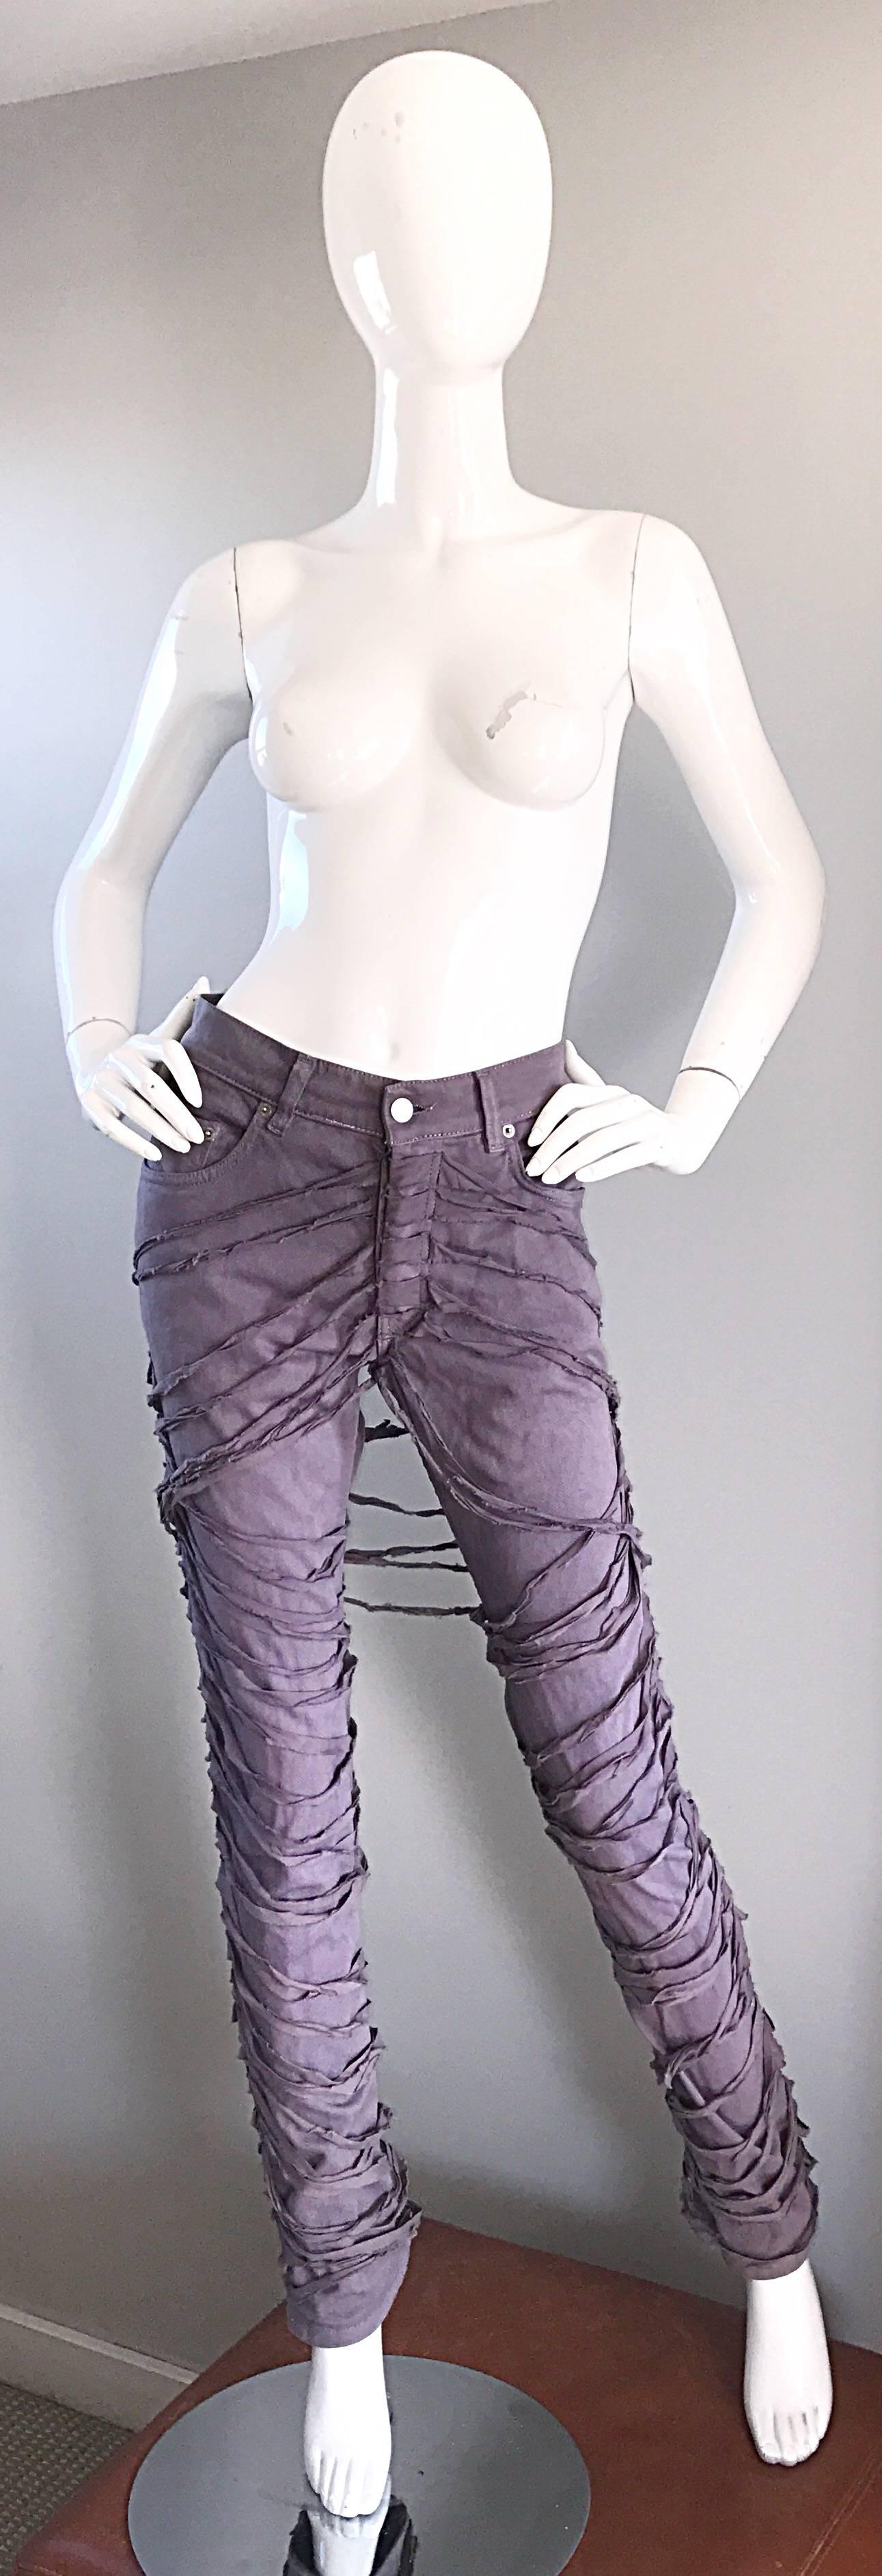 Extremely rare HELMUT LANG Autumn / Winter 2004 famous bondage mummy blue jeans! Fantastic light purple / gray color looks great with anything! Flattering high waist slim tailored fit. Features strips of fabric around the legs. Pockets at each side